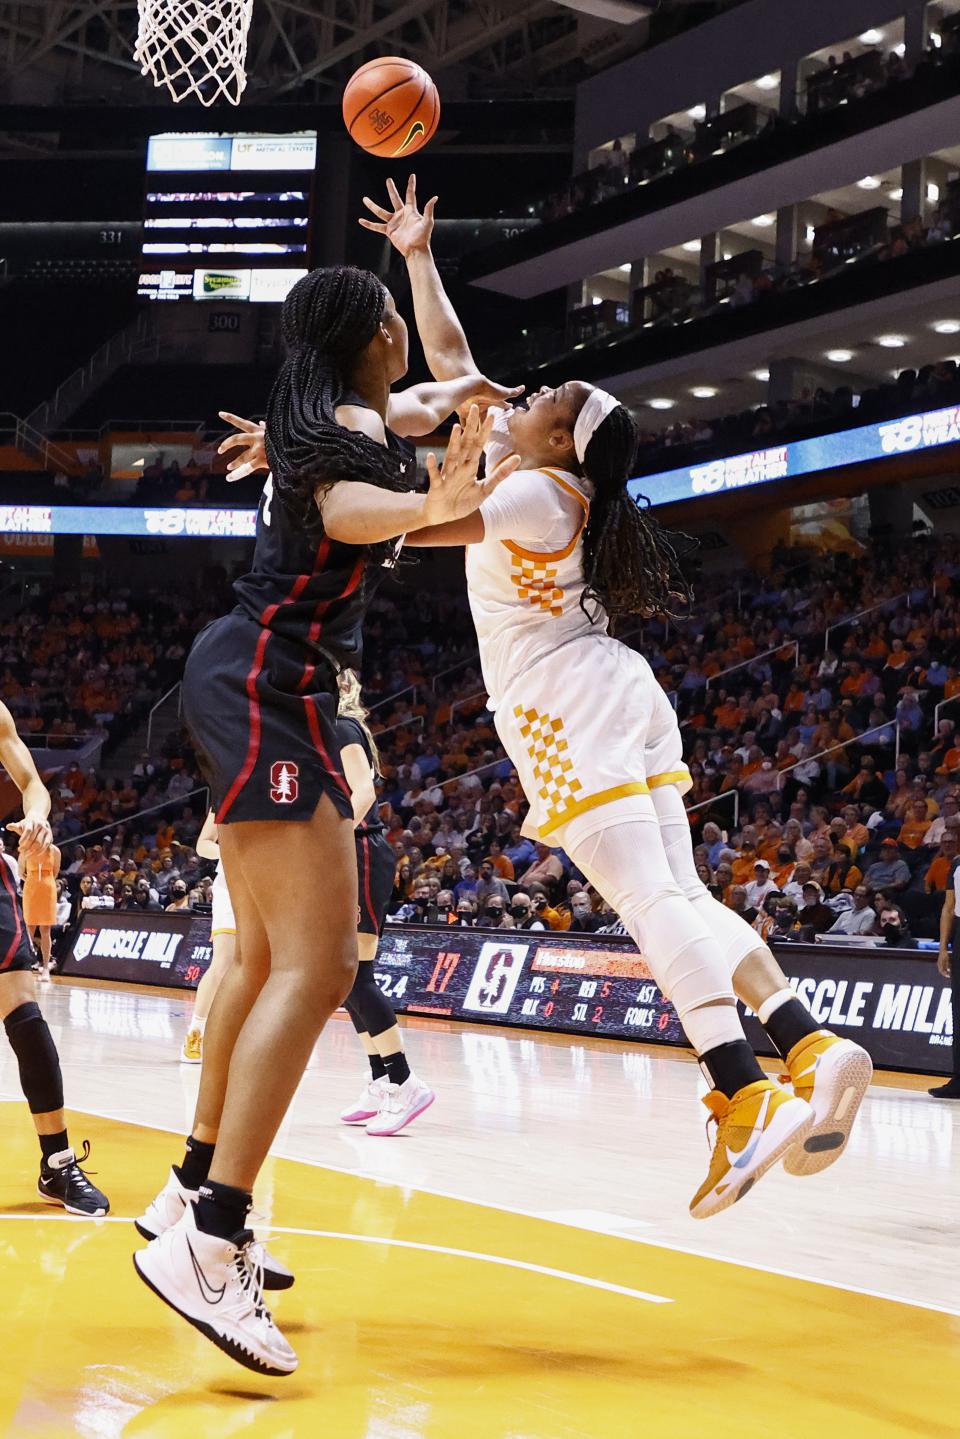 Tennessee guard Sara Puckett, right, shoots past Stanford forward Kiki Iriafen, left, during the first half of an NCAA college basketball game Saturday, Dec. 18, 2021, in Knoxville, Tenn. (AP Photo/Wade Payne)